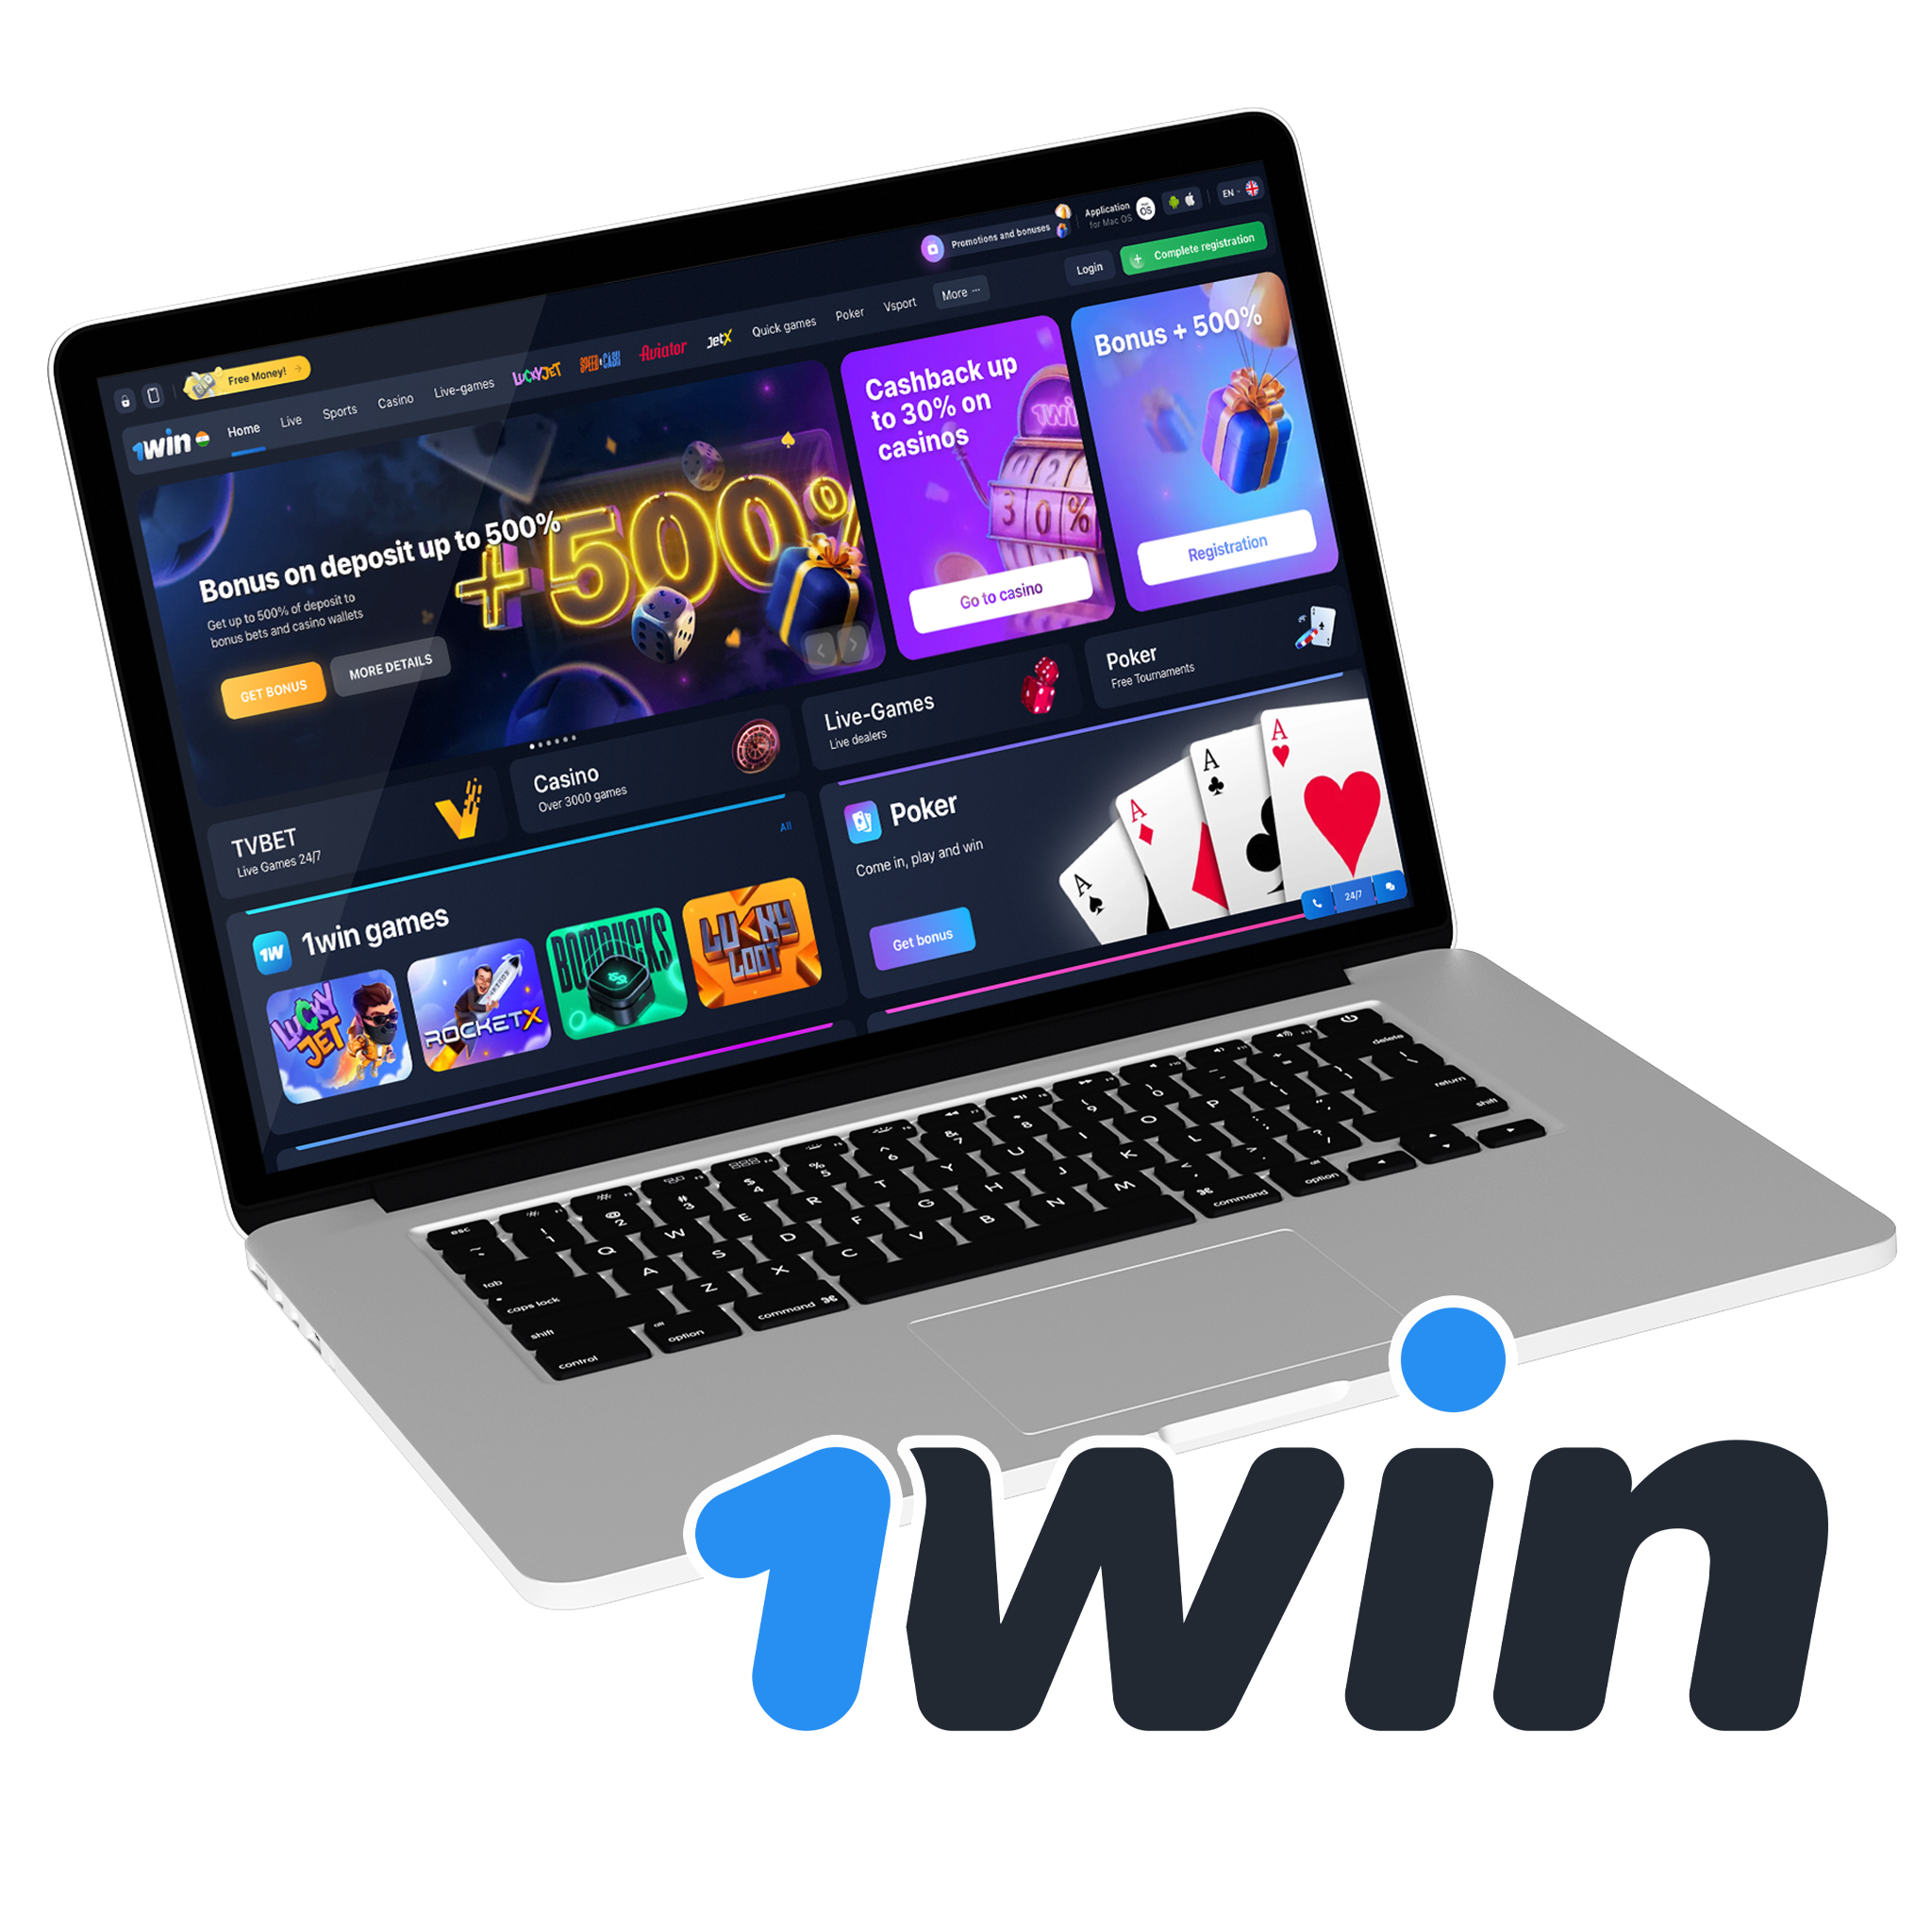 1win offers a generous welcome bonus to all new users.